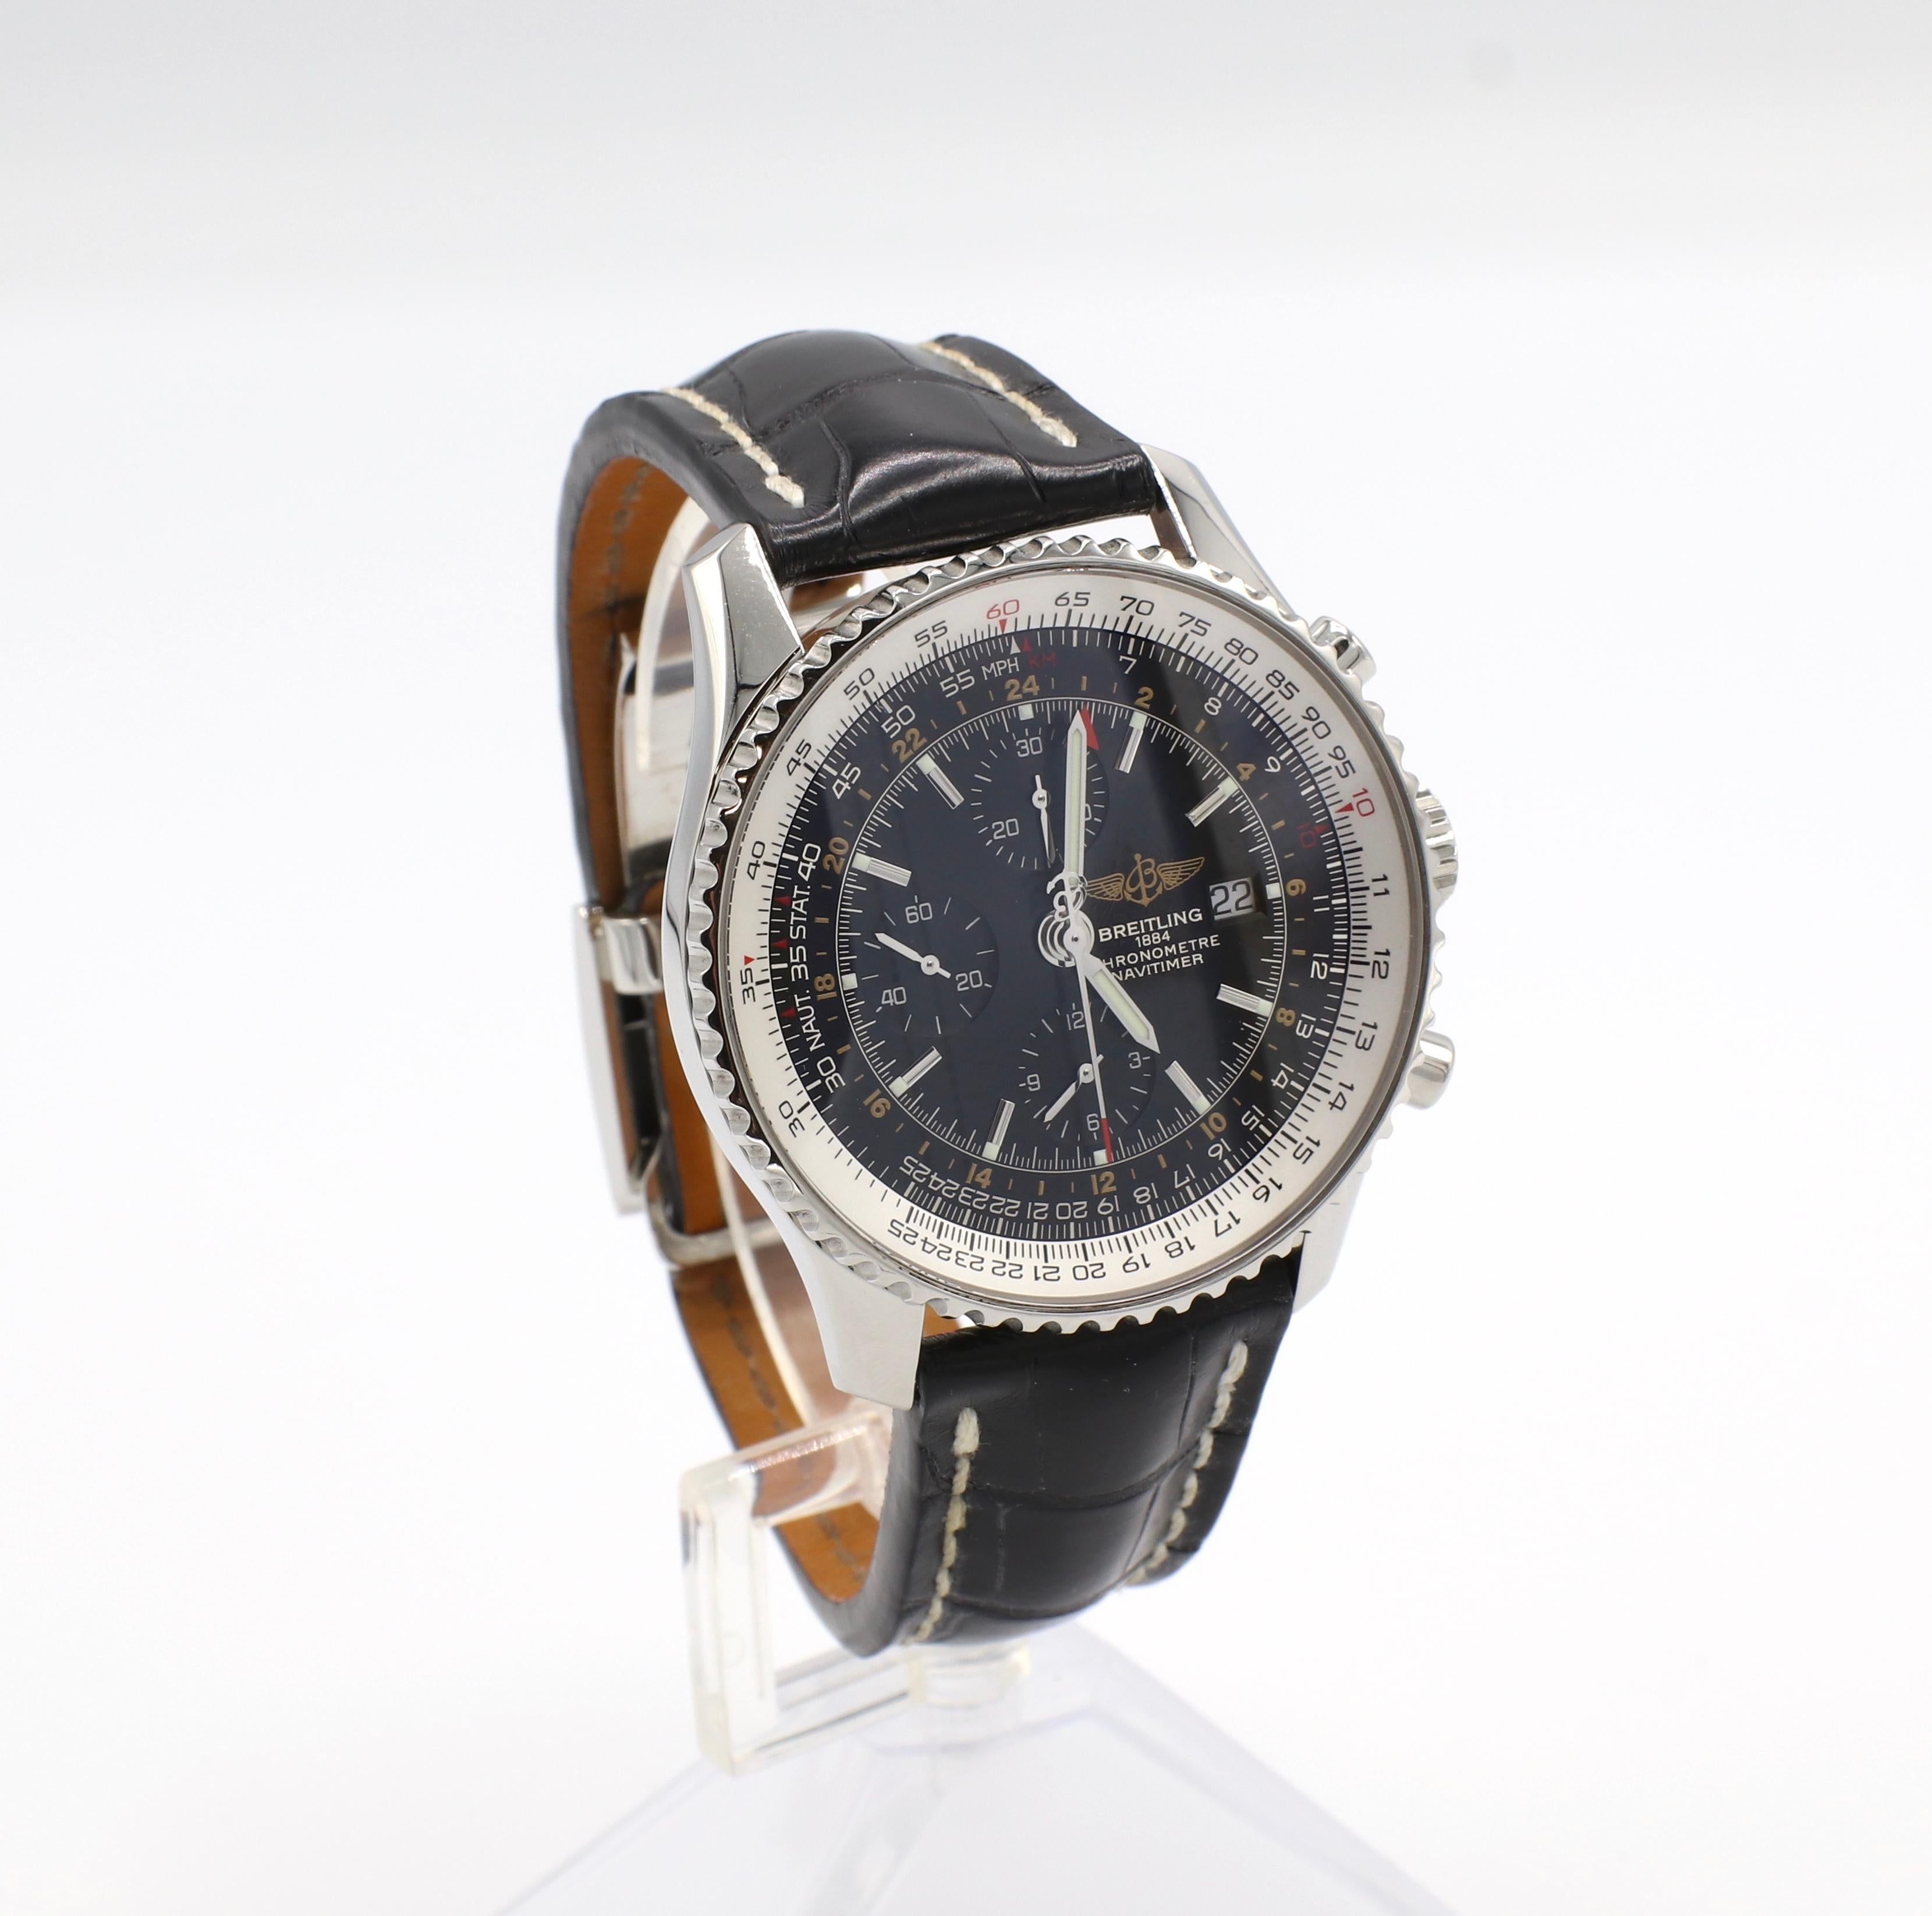 Breitling Navitimer Chronograph A24322 Black Dial Leather Strap Watch

Model: A24322
Dial: Black
Date: 3 o'clock
Case: Stainless steel
Band: Leather, outside, black crocodile, inside, camel color
Deployment: Folding stainless steel buckle
Movement: